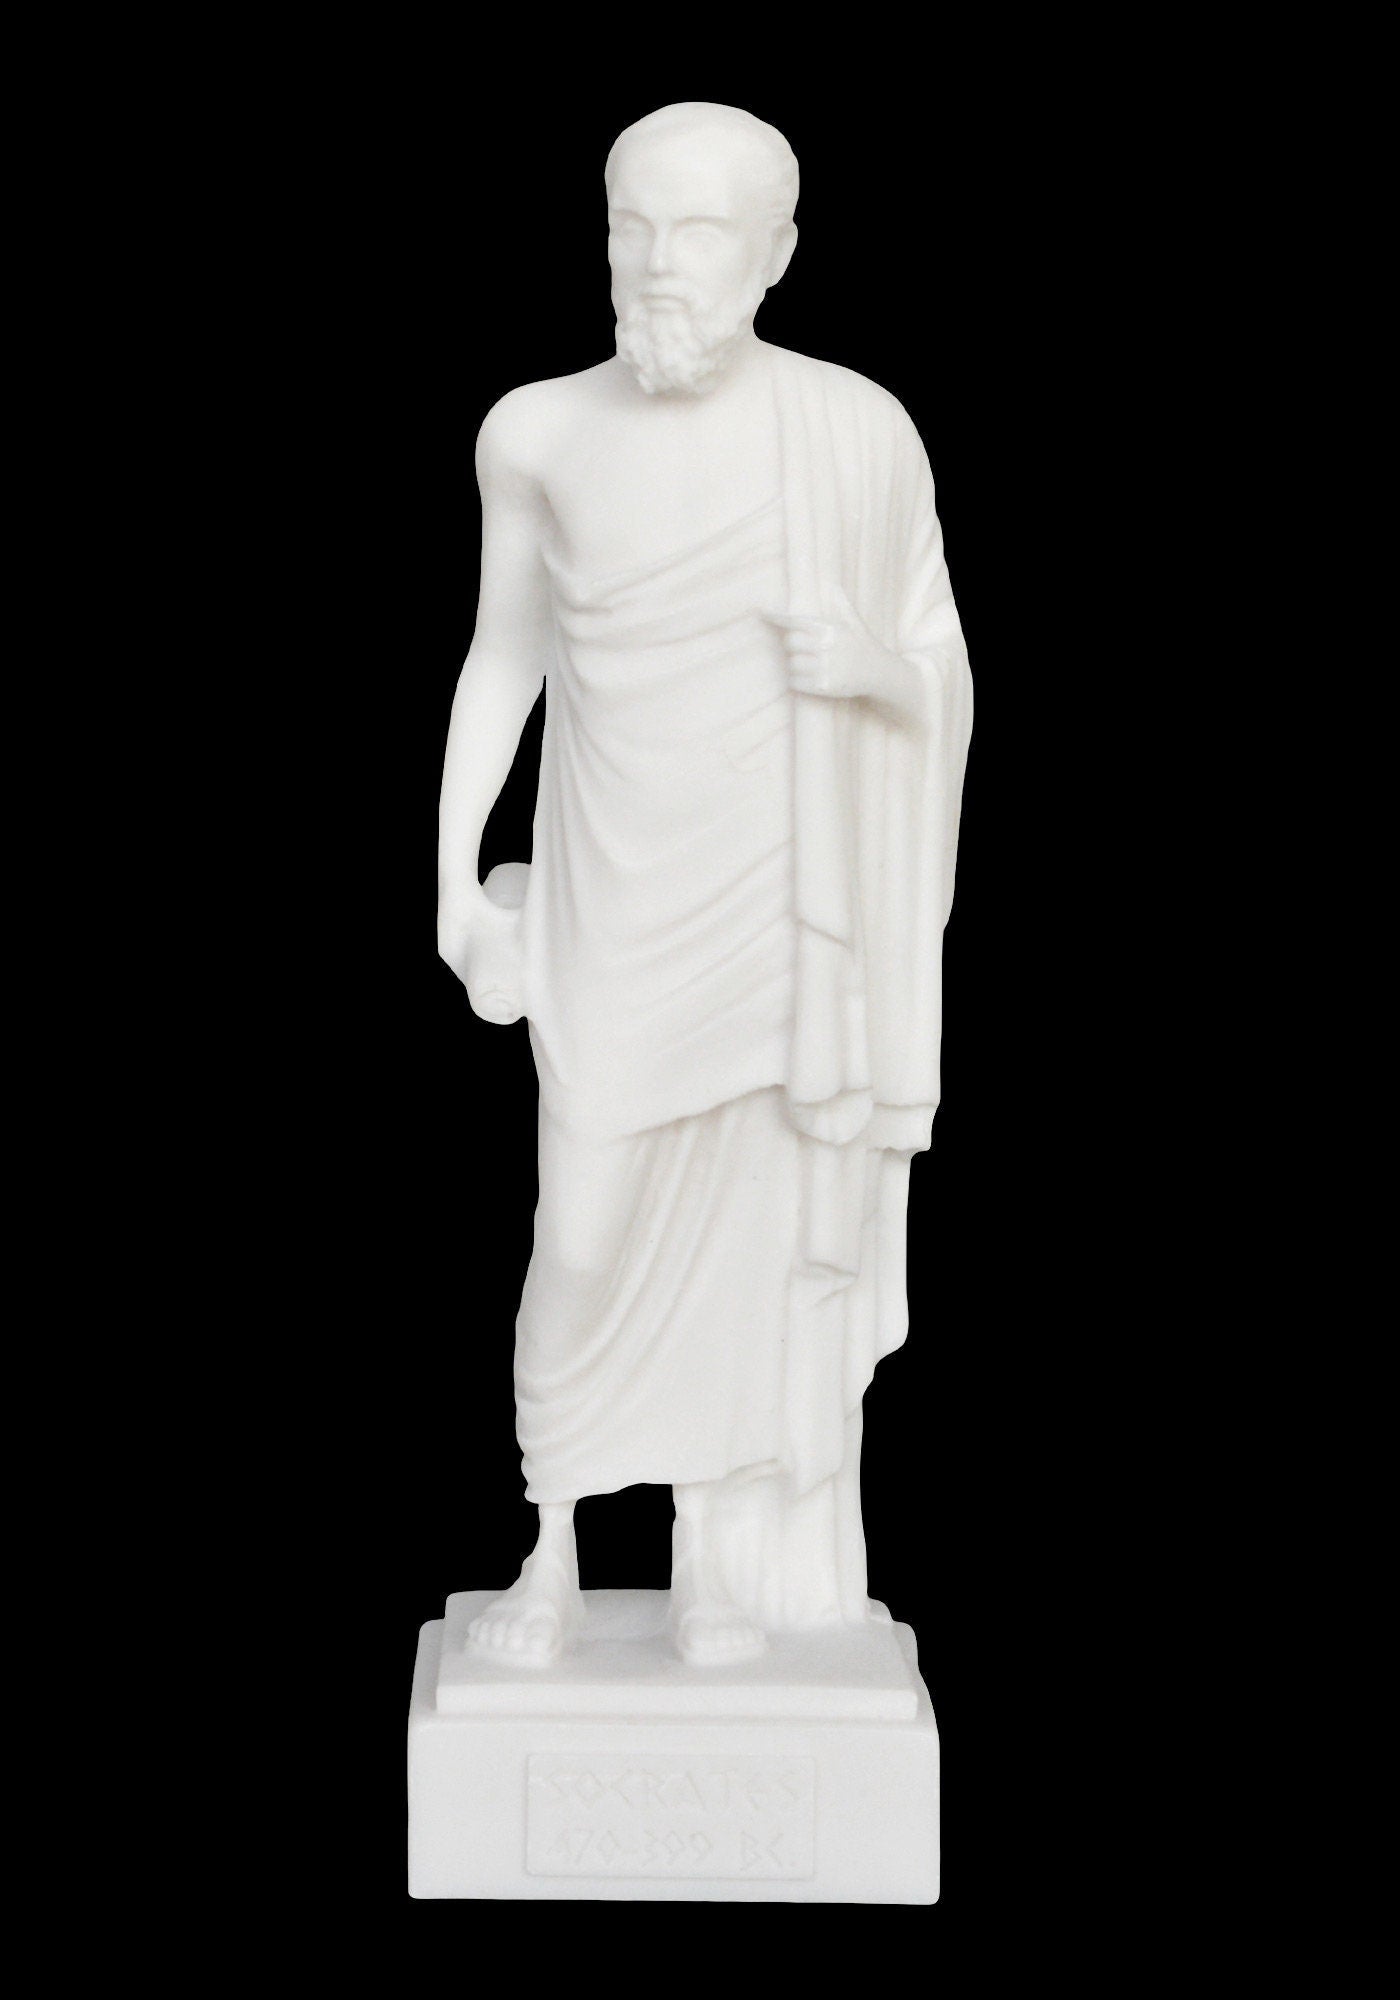 Socrates - Ancient Greek Philosopher - 470-399 BC - Teacher of Plato - Father of Western Philosophy - Alabaster Statue